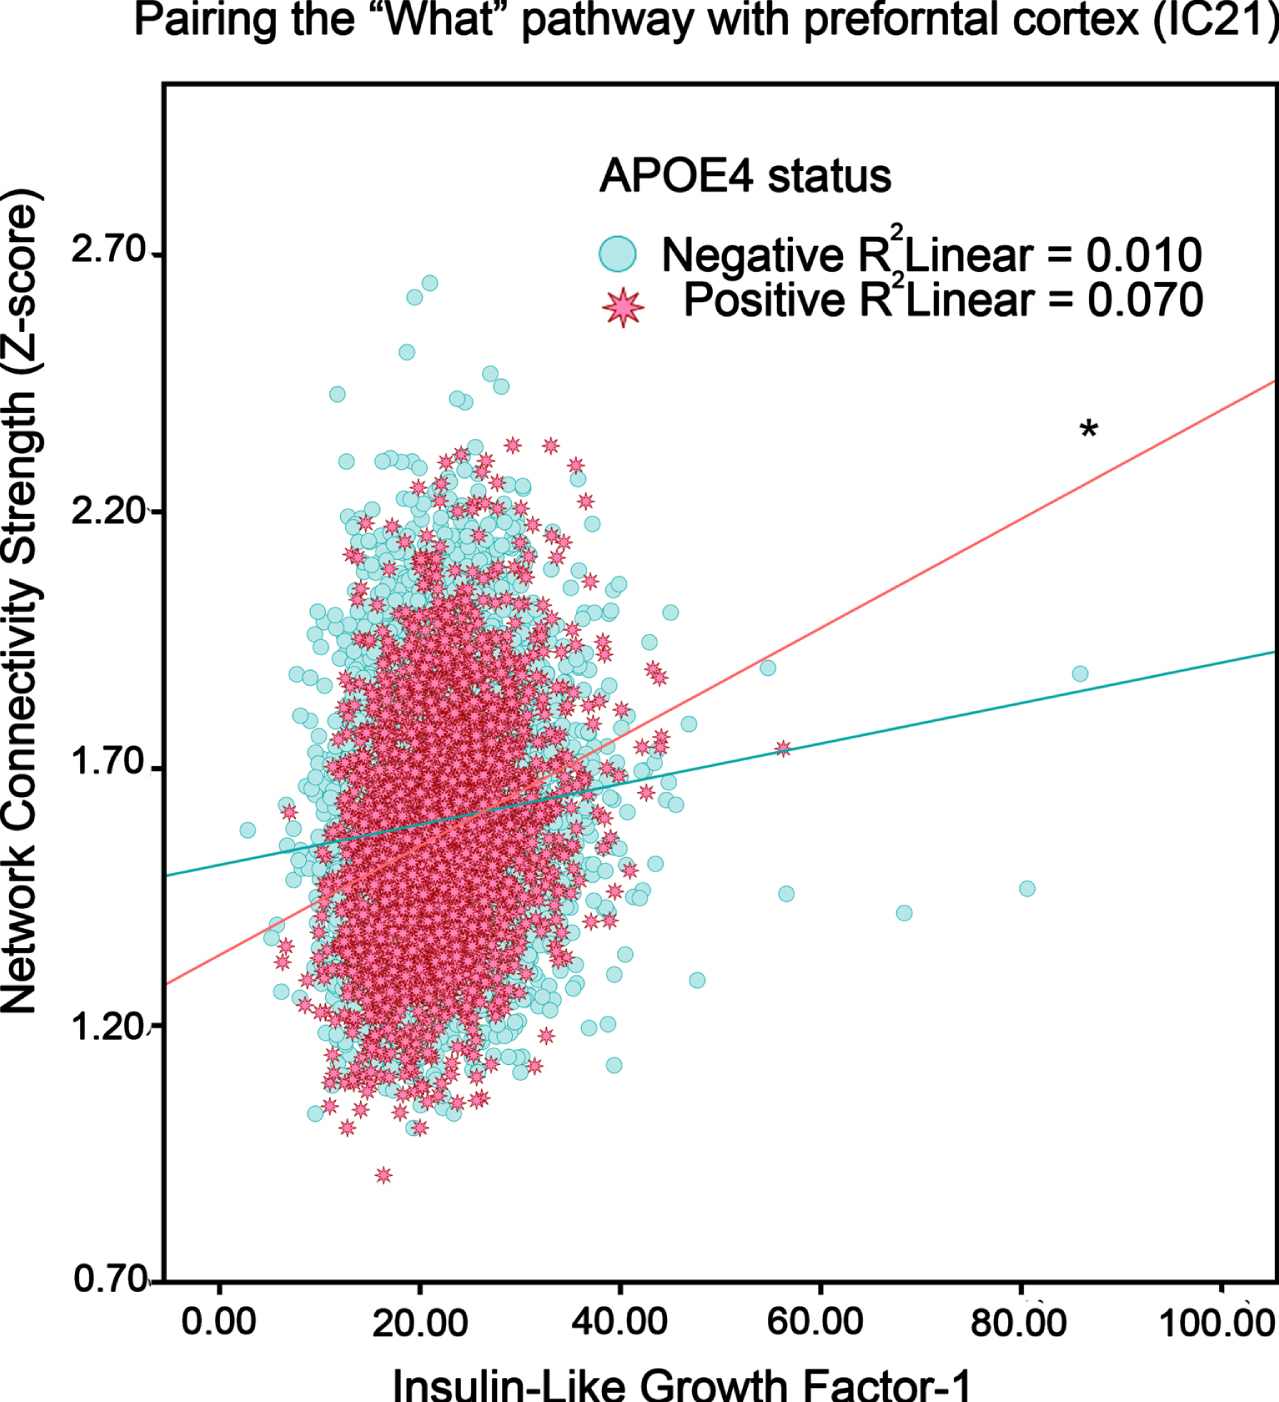 The association between IGF-1 levels and intrinsic functional connectivity (i.e., neural network activity) in adults without or with an APOE4 genotype (“positive”, “negative”). Blue circles and red stars respectively represent APOE4 negative and APOE4 positive participants. *p < 0.05.